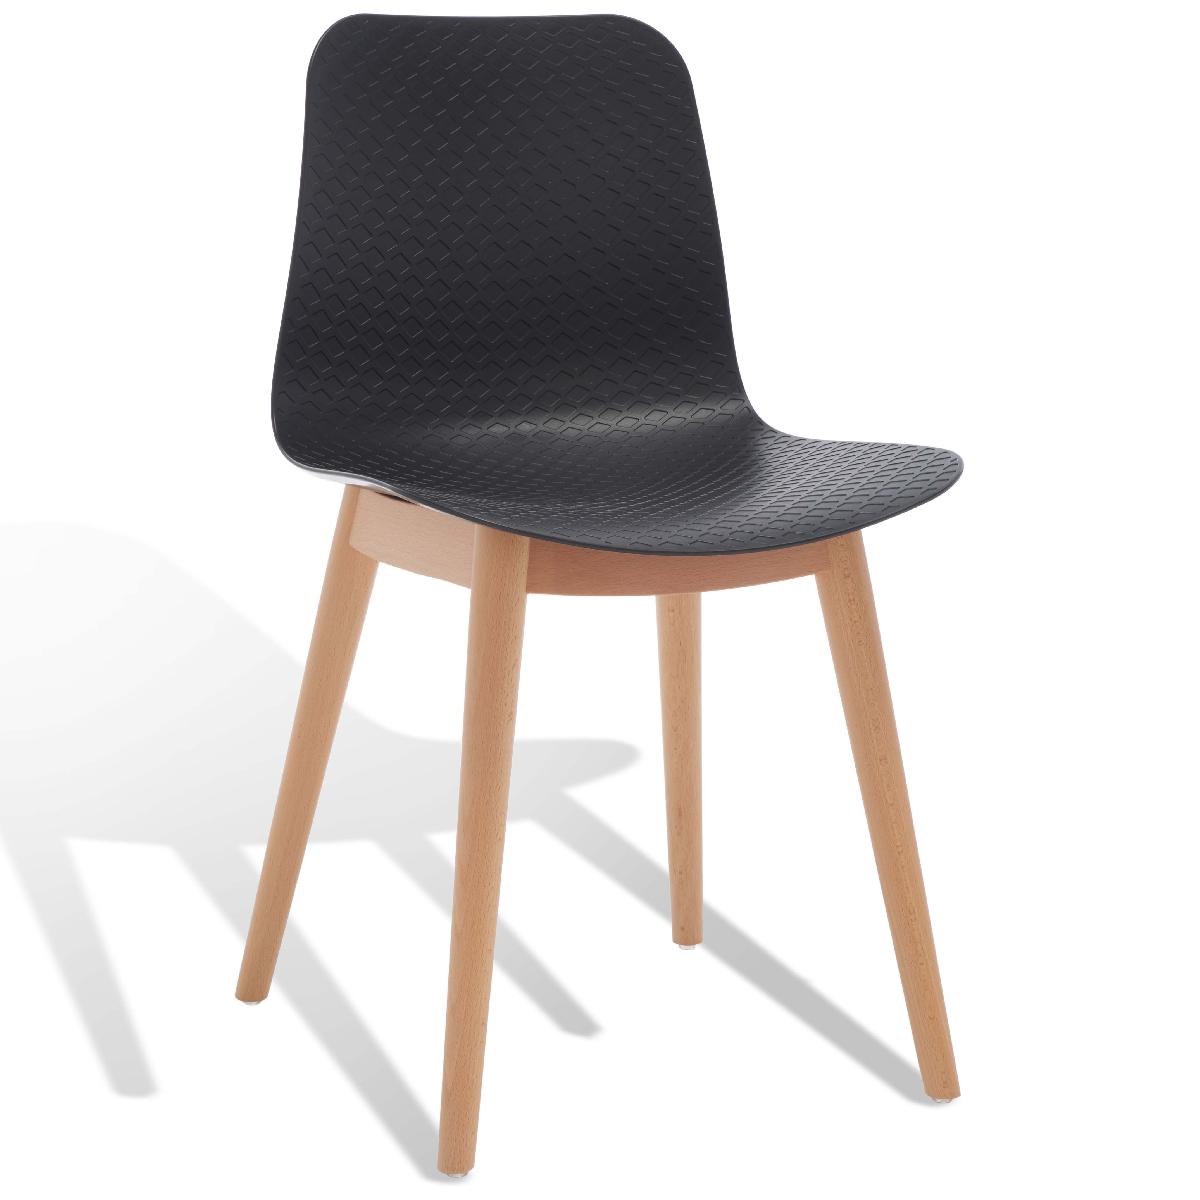 Safavieh Couture Haddie Molded Plastic Dining Chair - Black / Natural